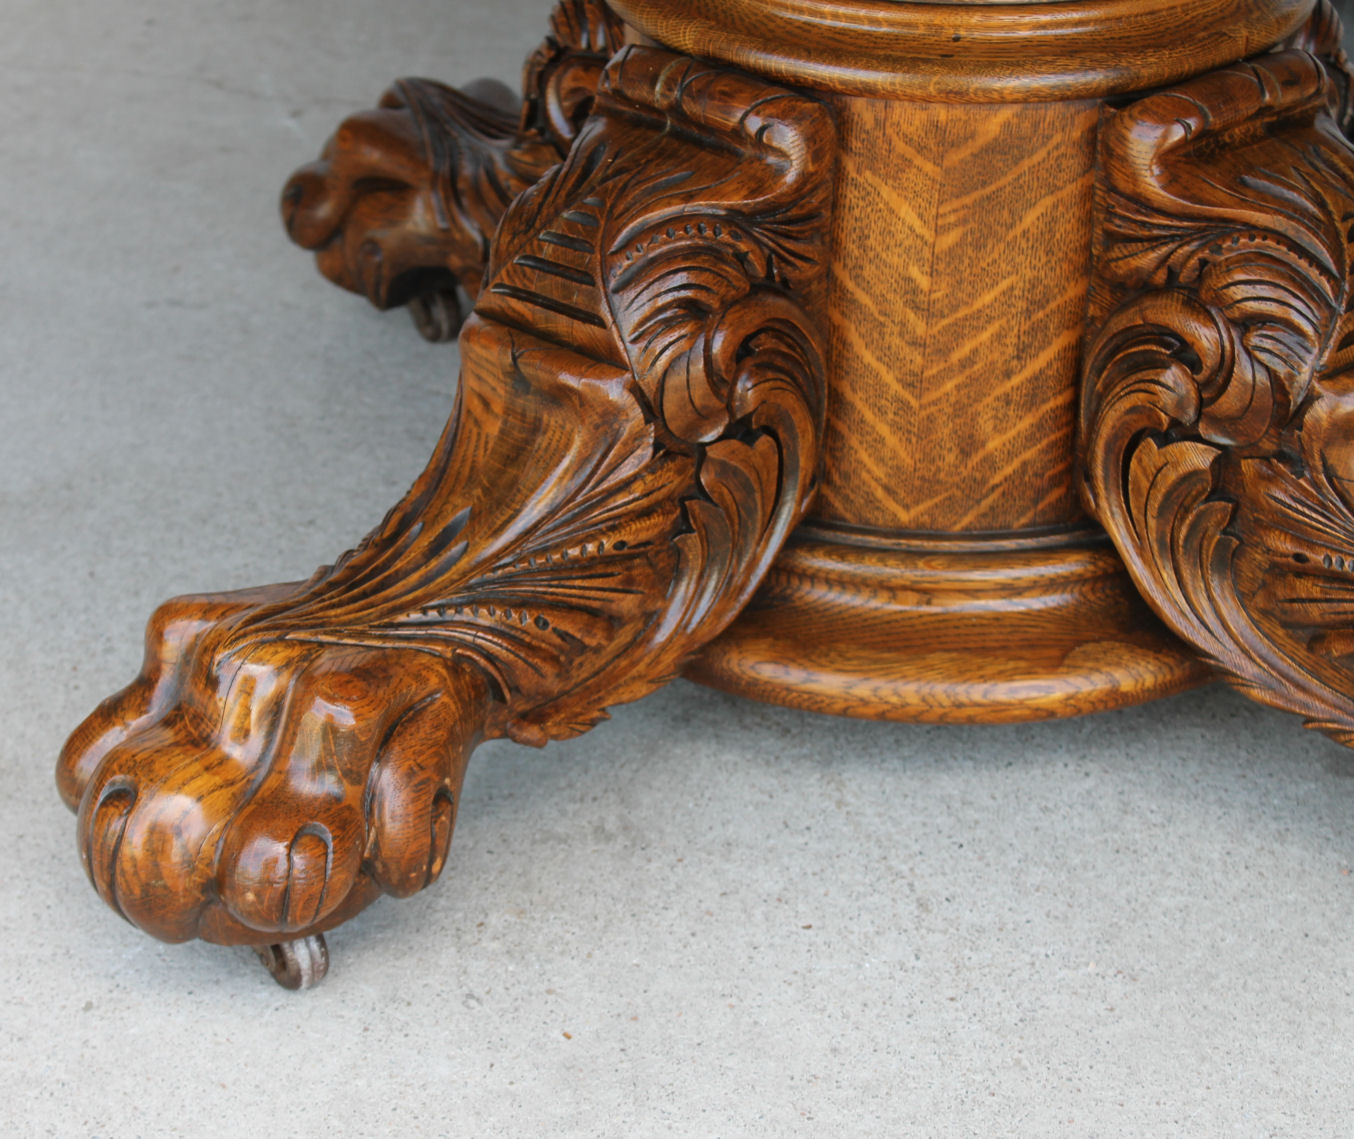 Bargain John's Antiques | Round Oak Dining Table - large carved claw